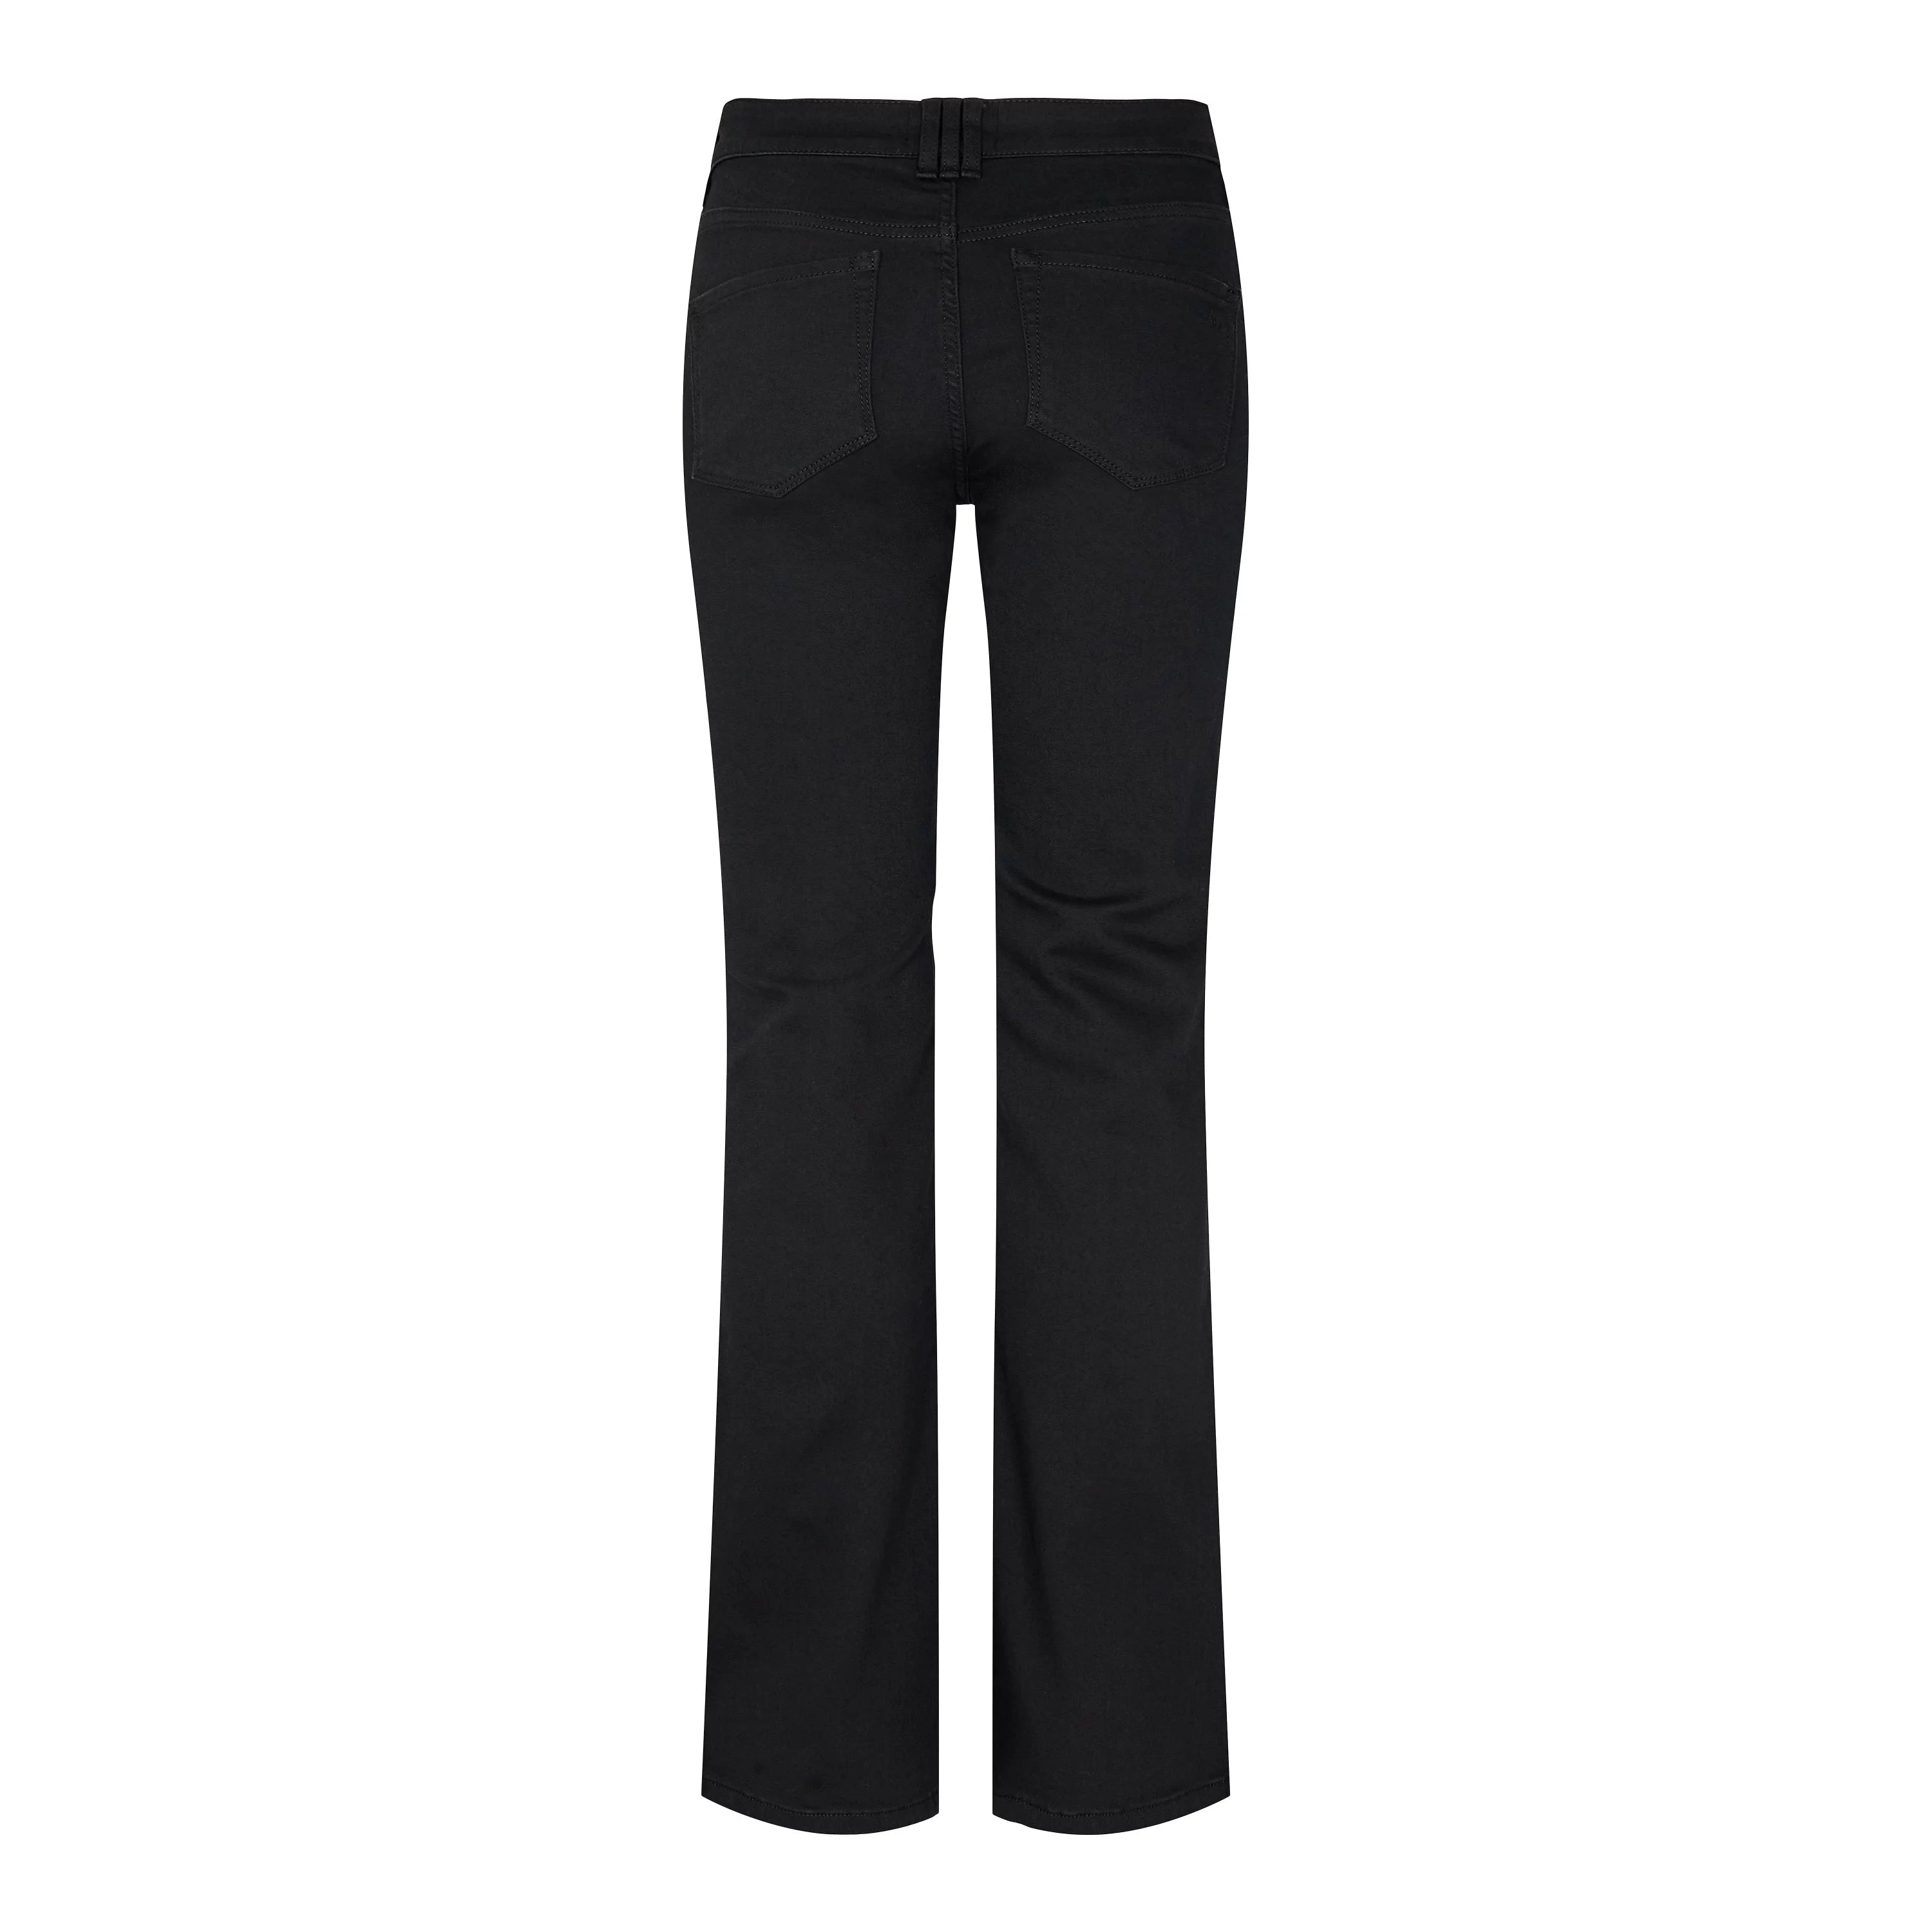 Ivy - Tara flare jeans Wash, cool excellent black 30" by Ivy | stylebykul